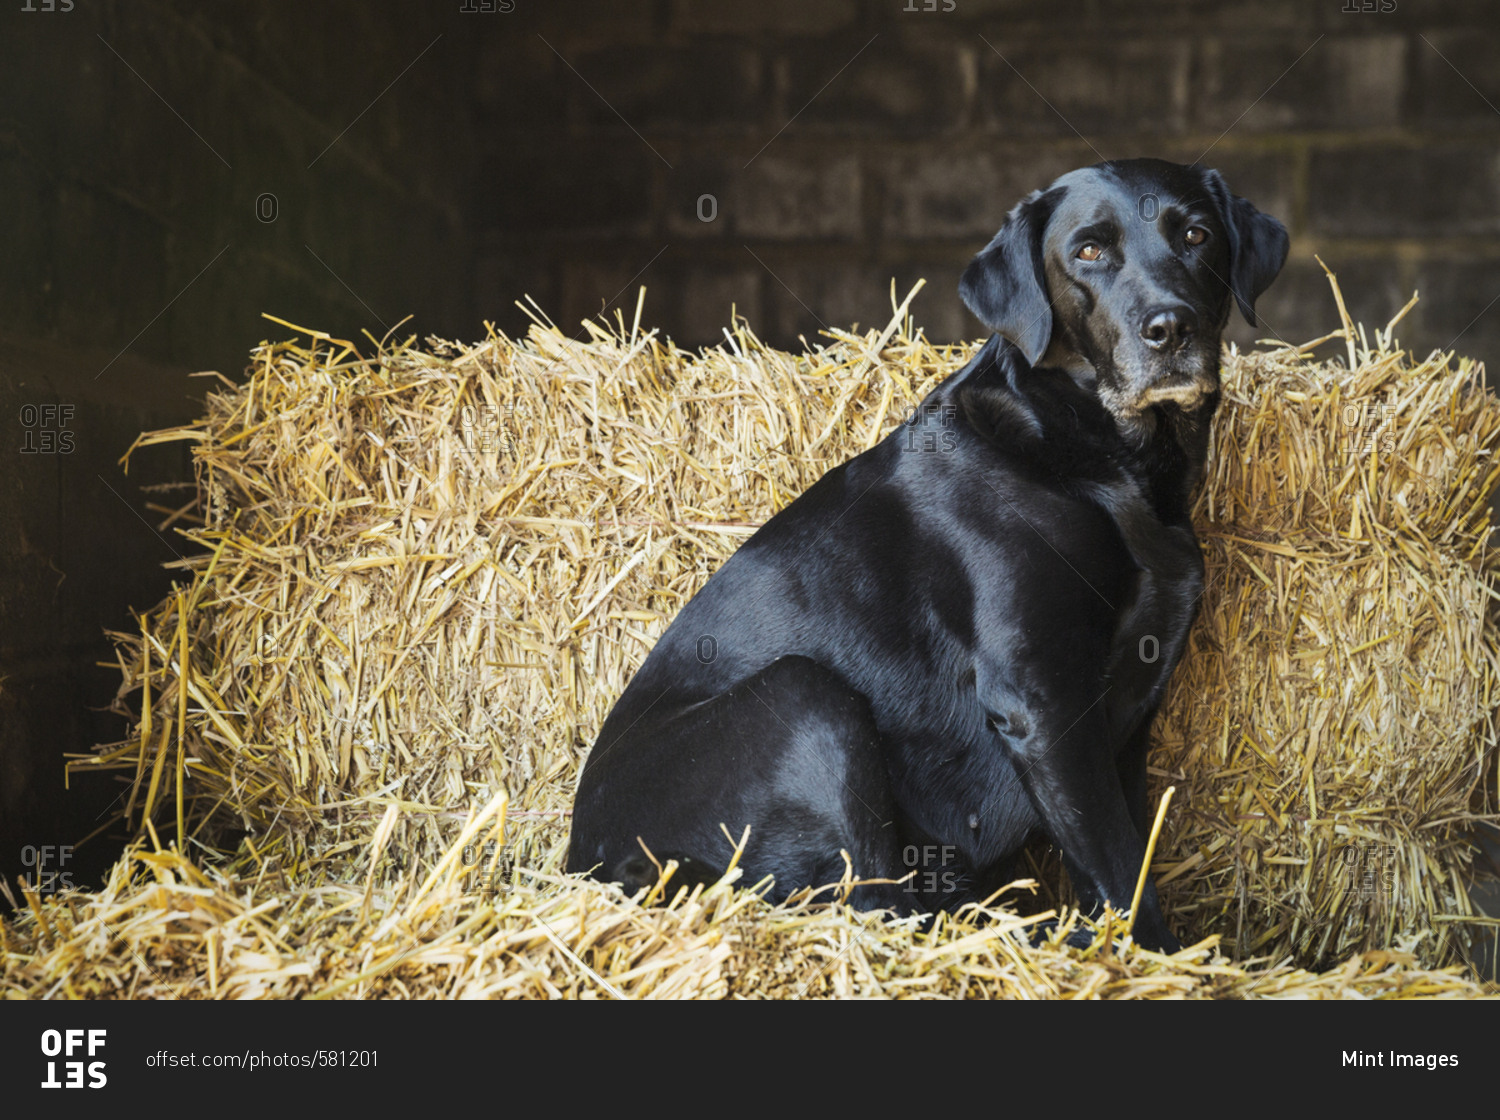 Black Labrador dog sitting on a bale of straw in a stable